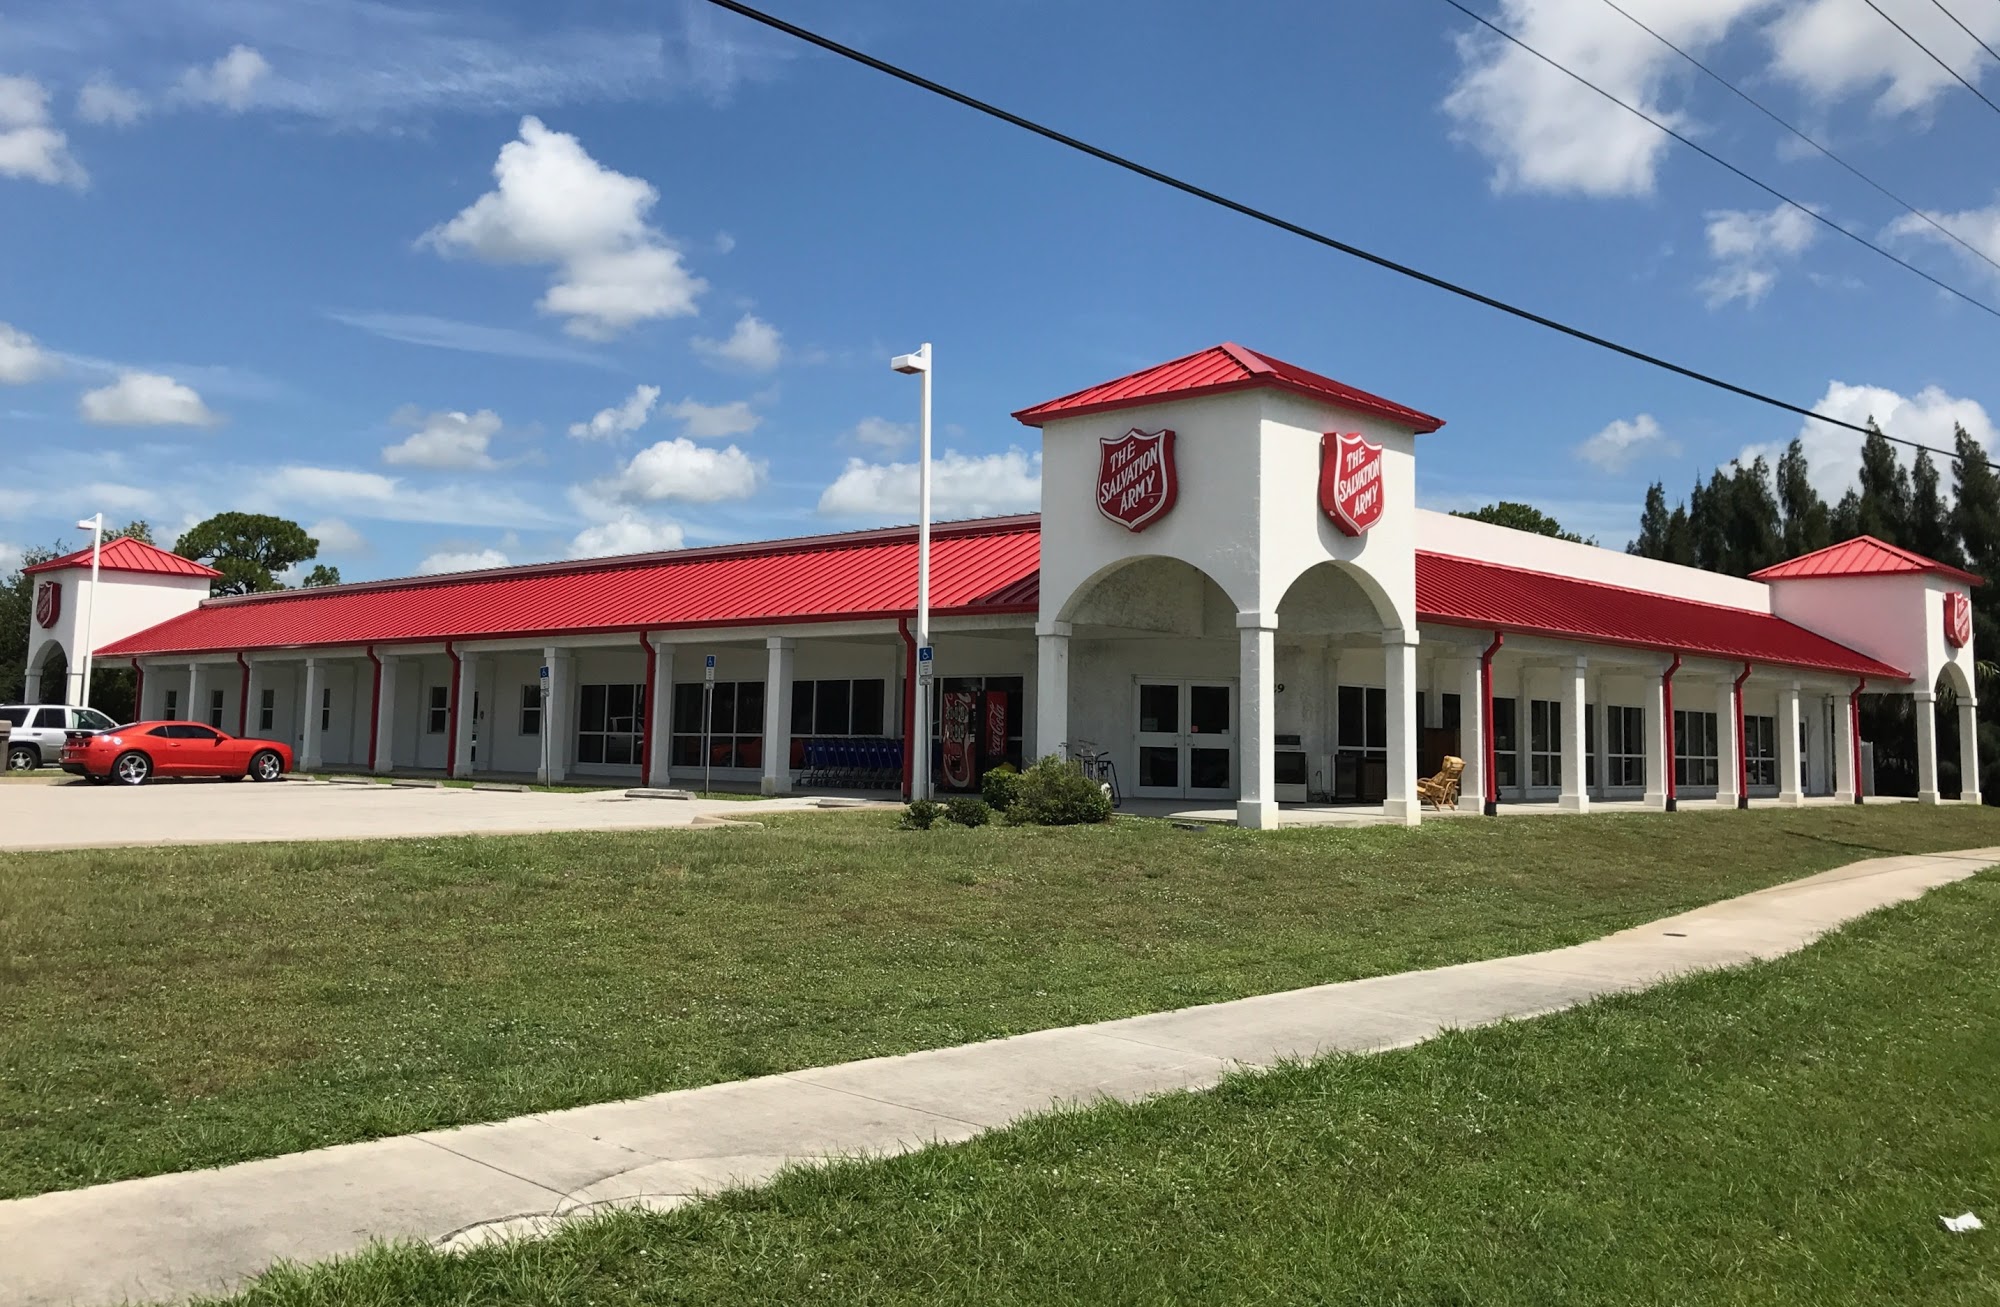 The Salvation Army Service Center & Family Store